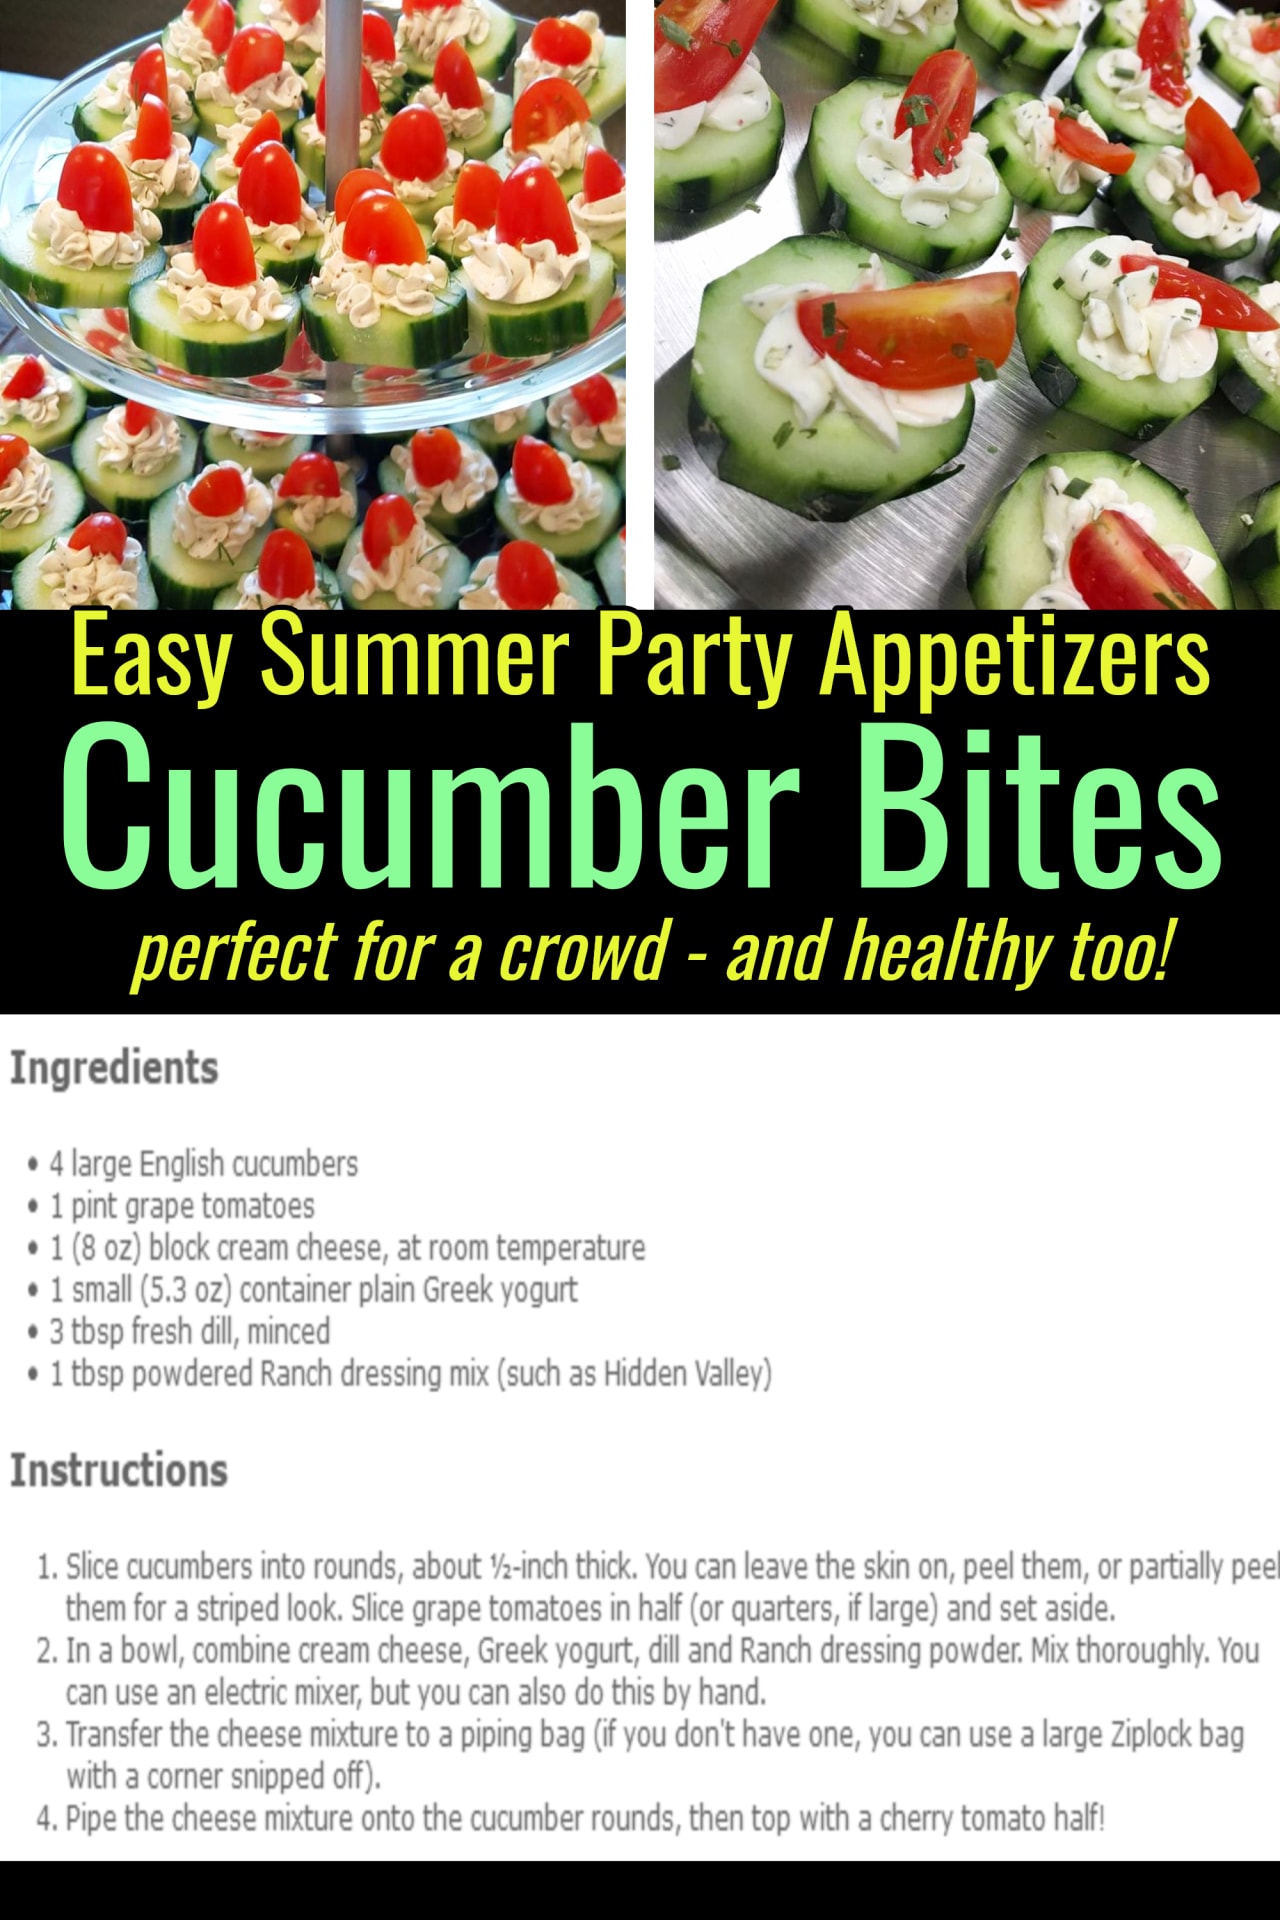 Easy summer party appetizer ideas - simple summer BBQ cookout, neighborhood block party, Holiday party, shower appetizers and finger-food ideas. Crowd pleasers! easy cucumber bites party appetizer or finger-food for a crowd - healthy appetizers too!